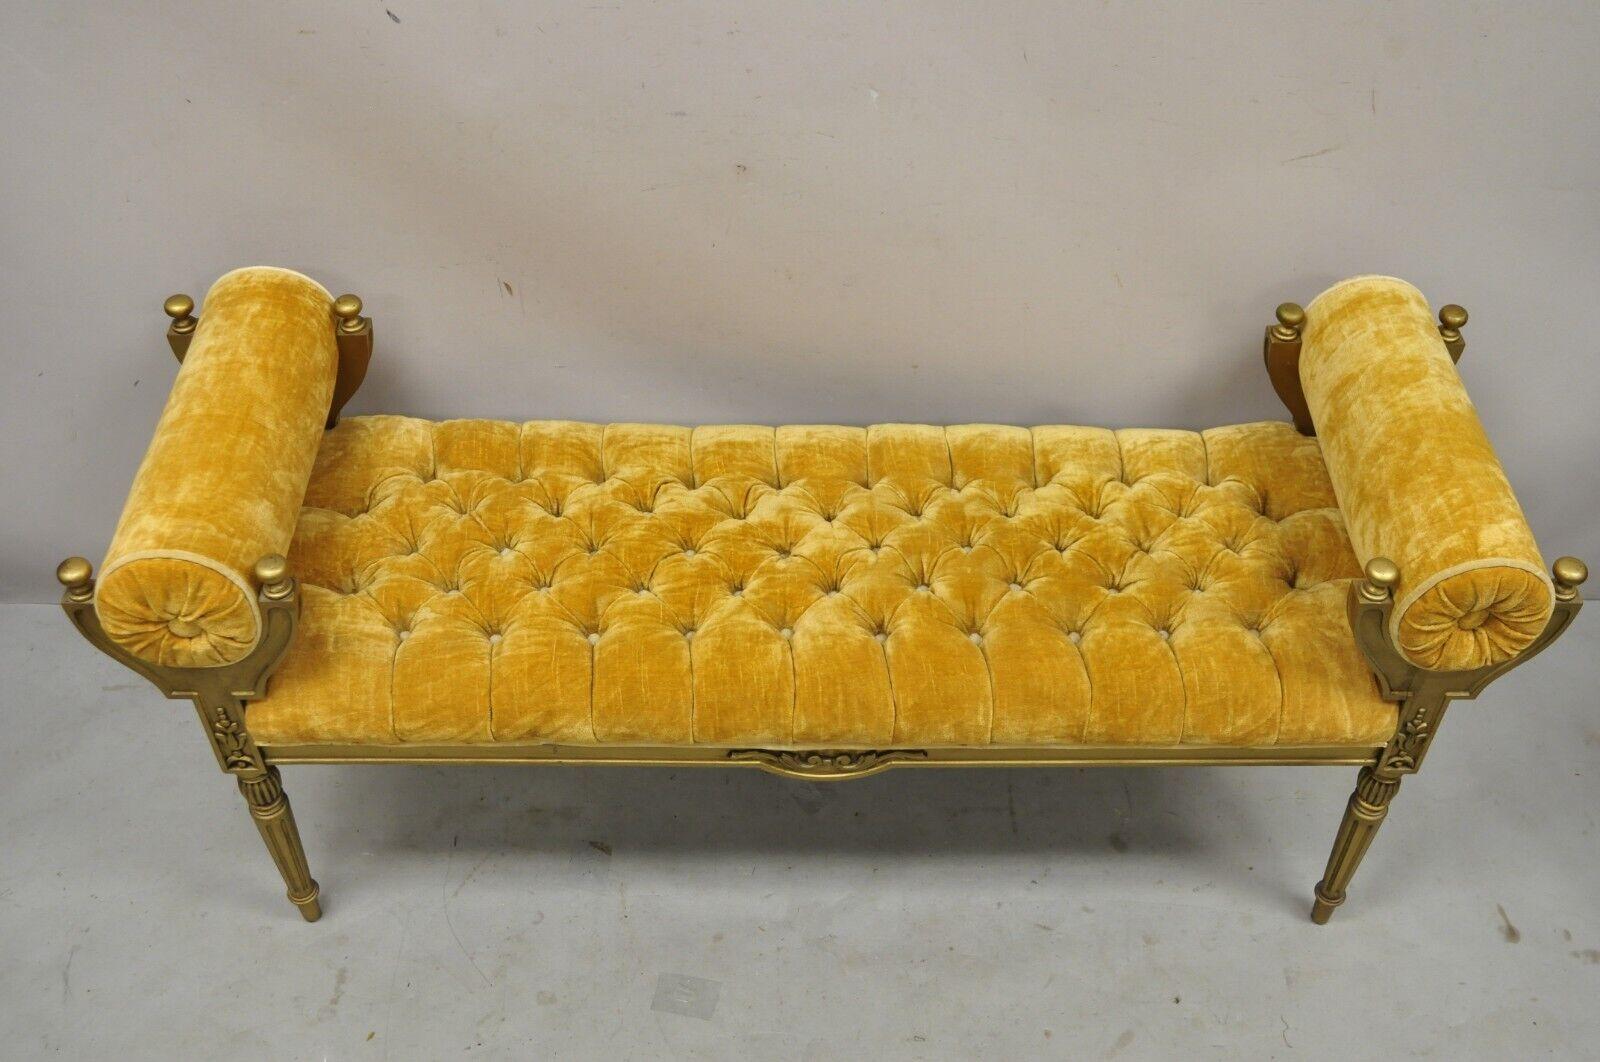 20th Century Vintage Gold Hollywood Regency French Style Window Bench with Tufted Upholstery